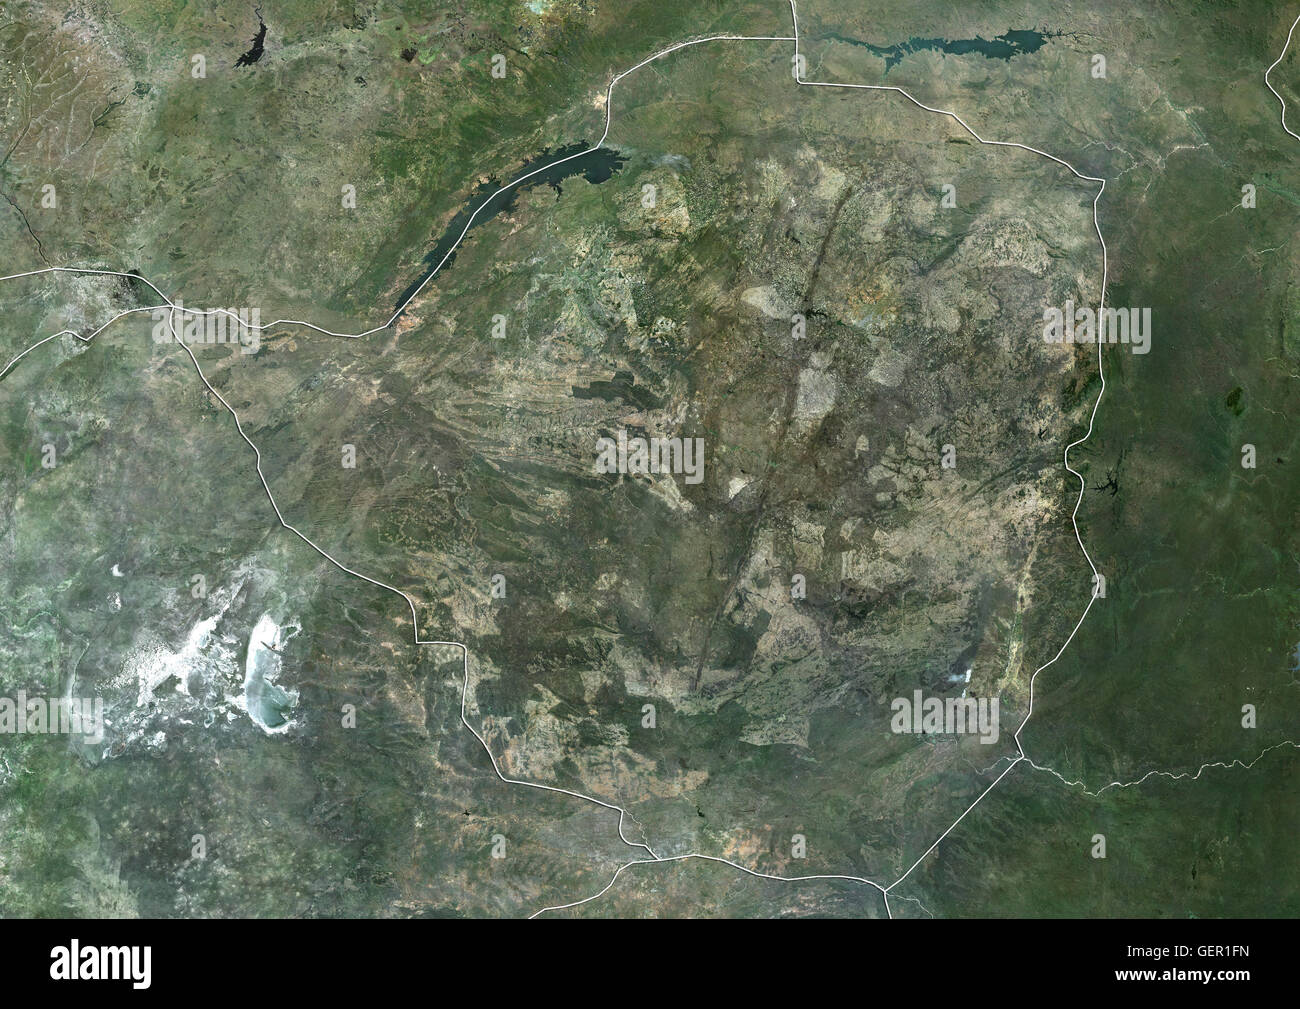 Satellite view of Zimbabwe (with country boundaries). This image was compiled from data acquired by Landsat satellites. Stock Photo